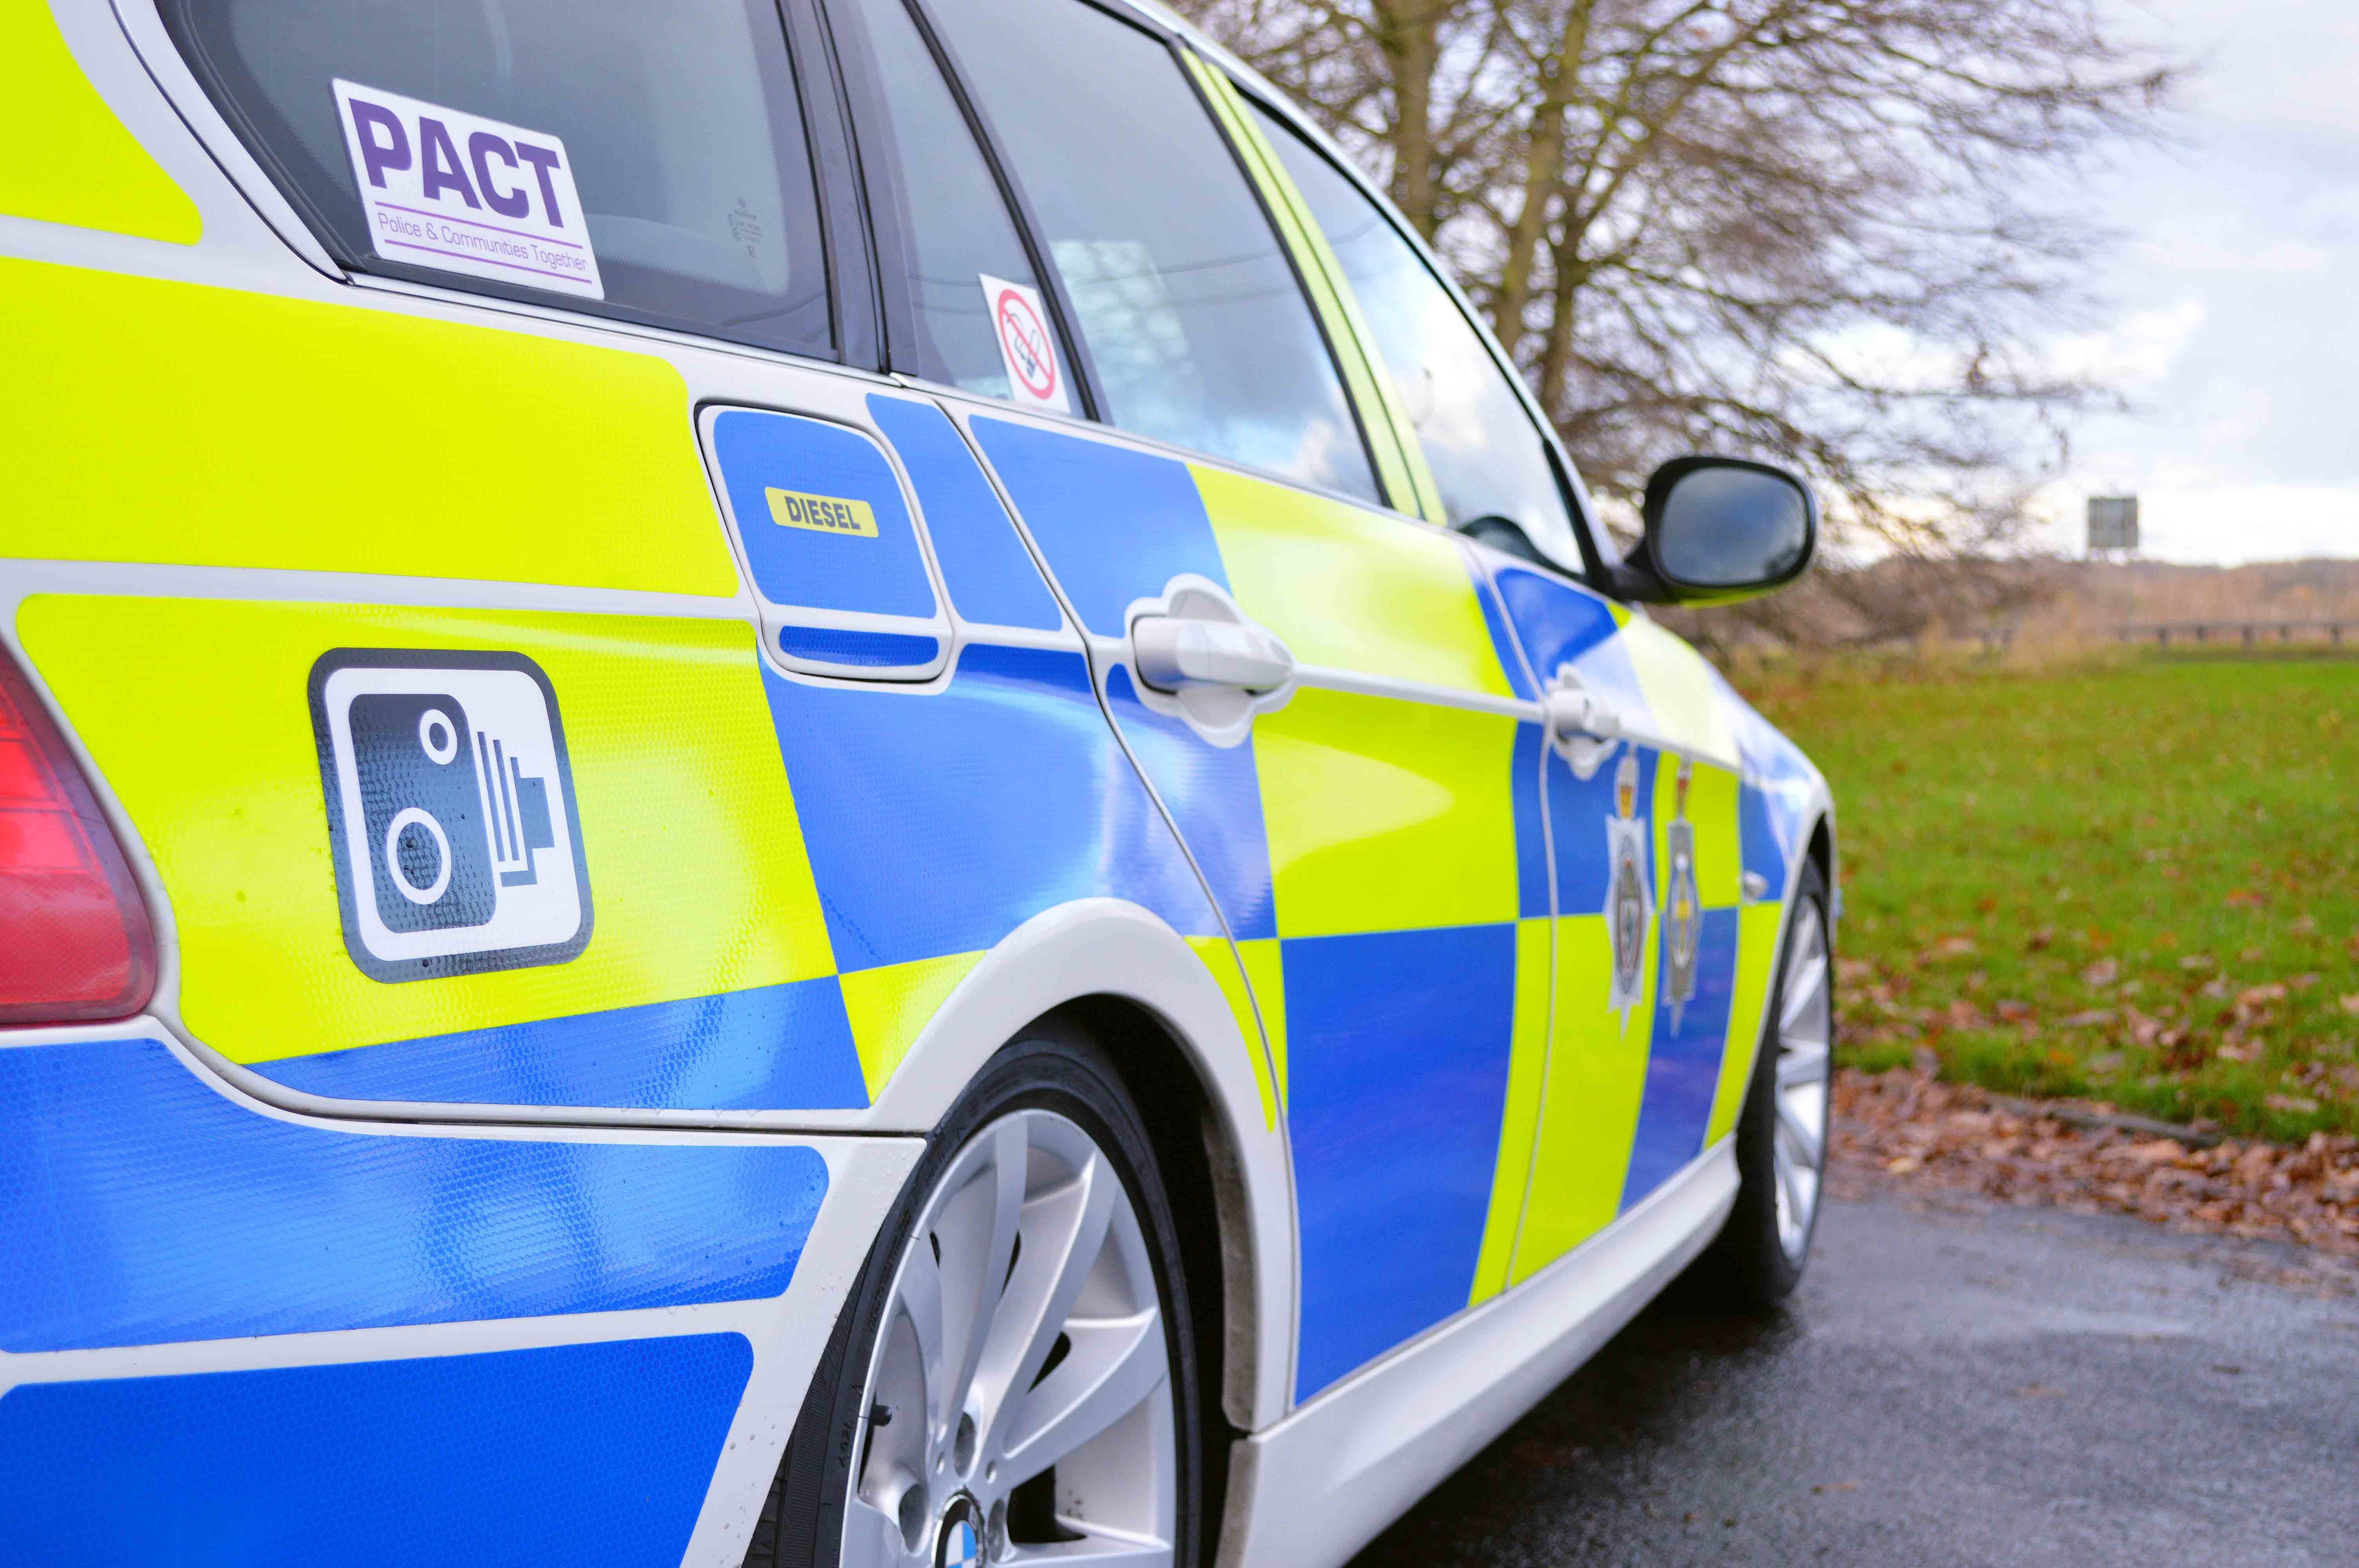 Speeding Targeted Across Two Counties